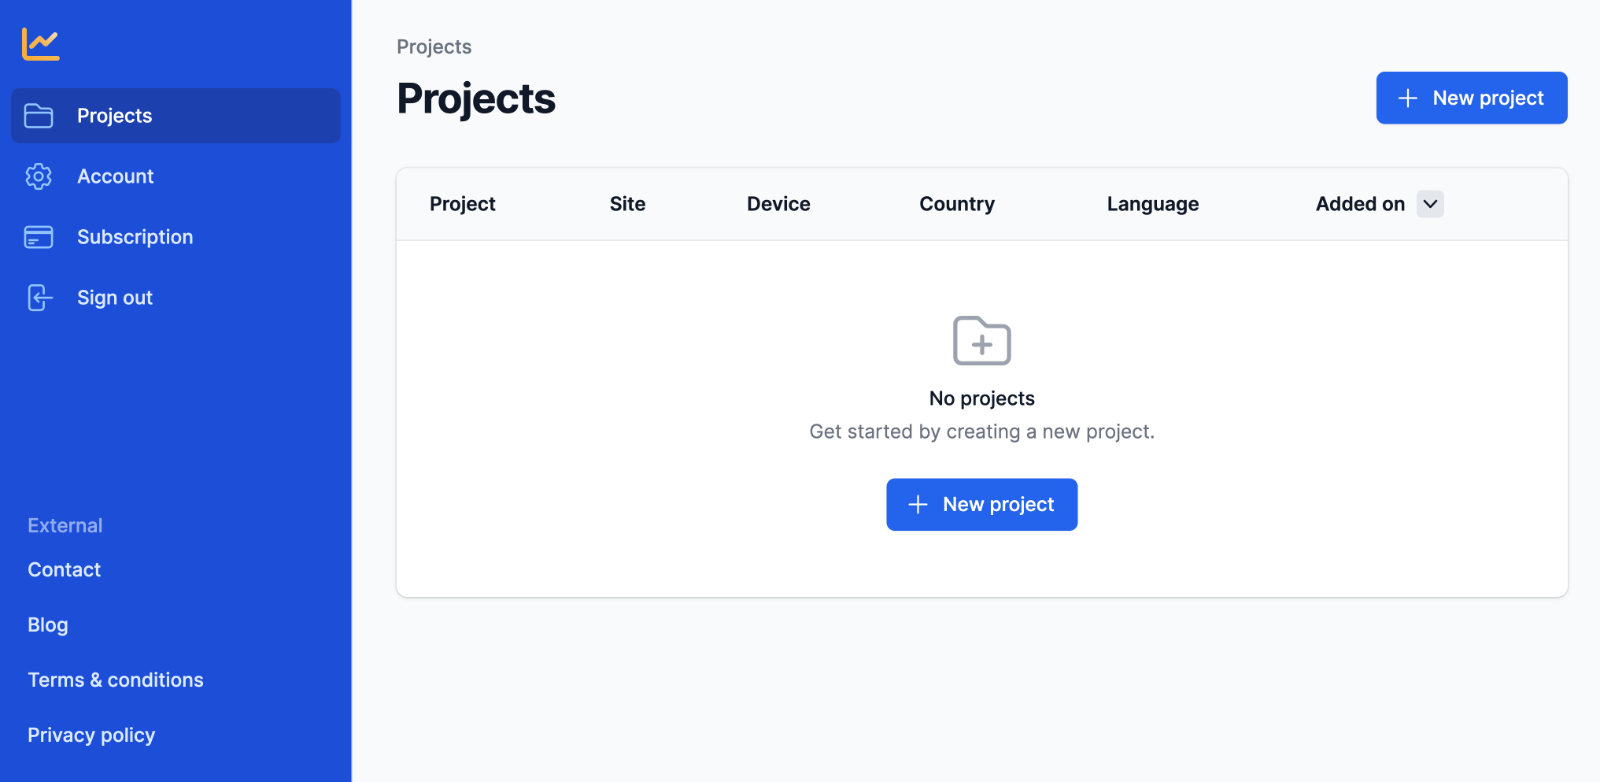 Projects overview of a new account